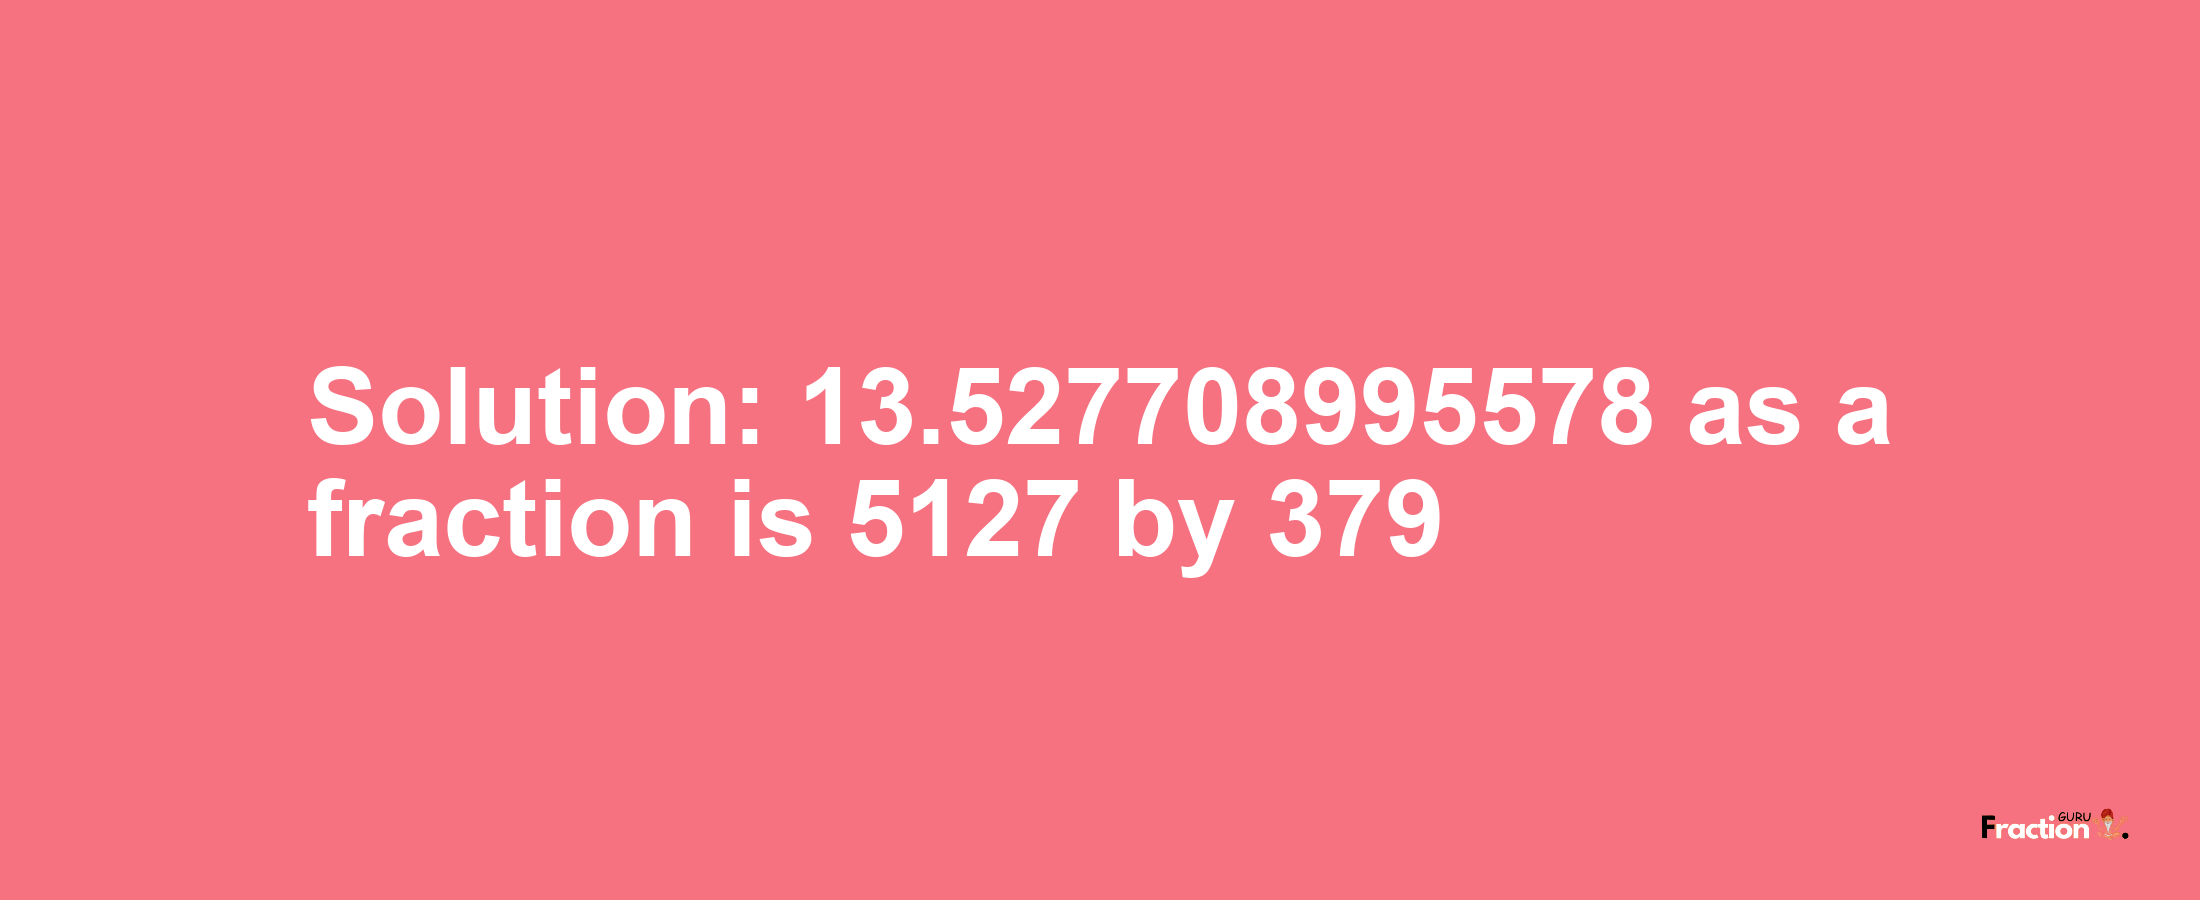 Solution:13.527708995578 as a fraction is 5127/379